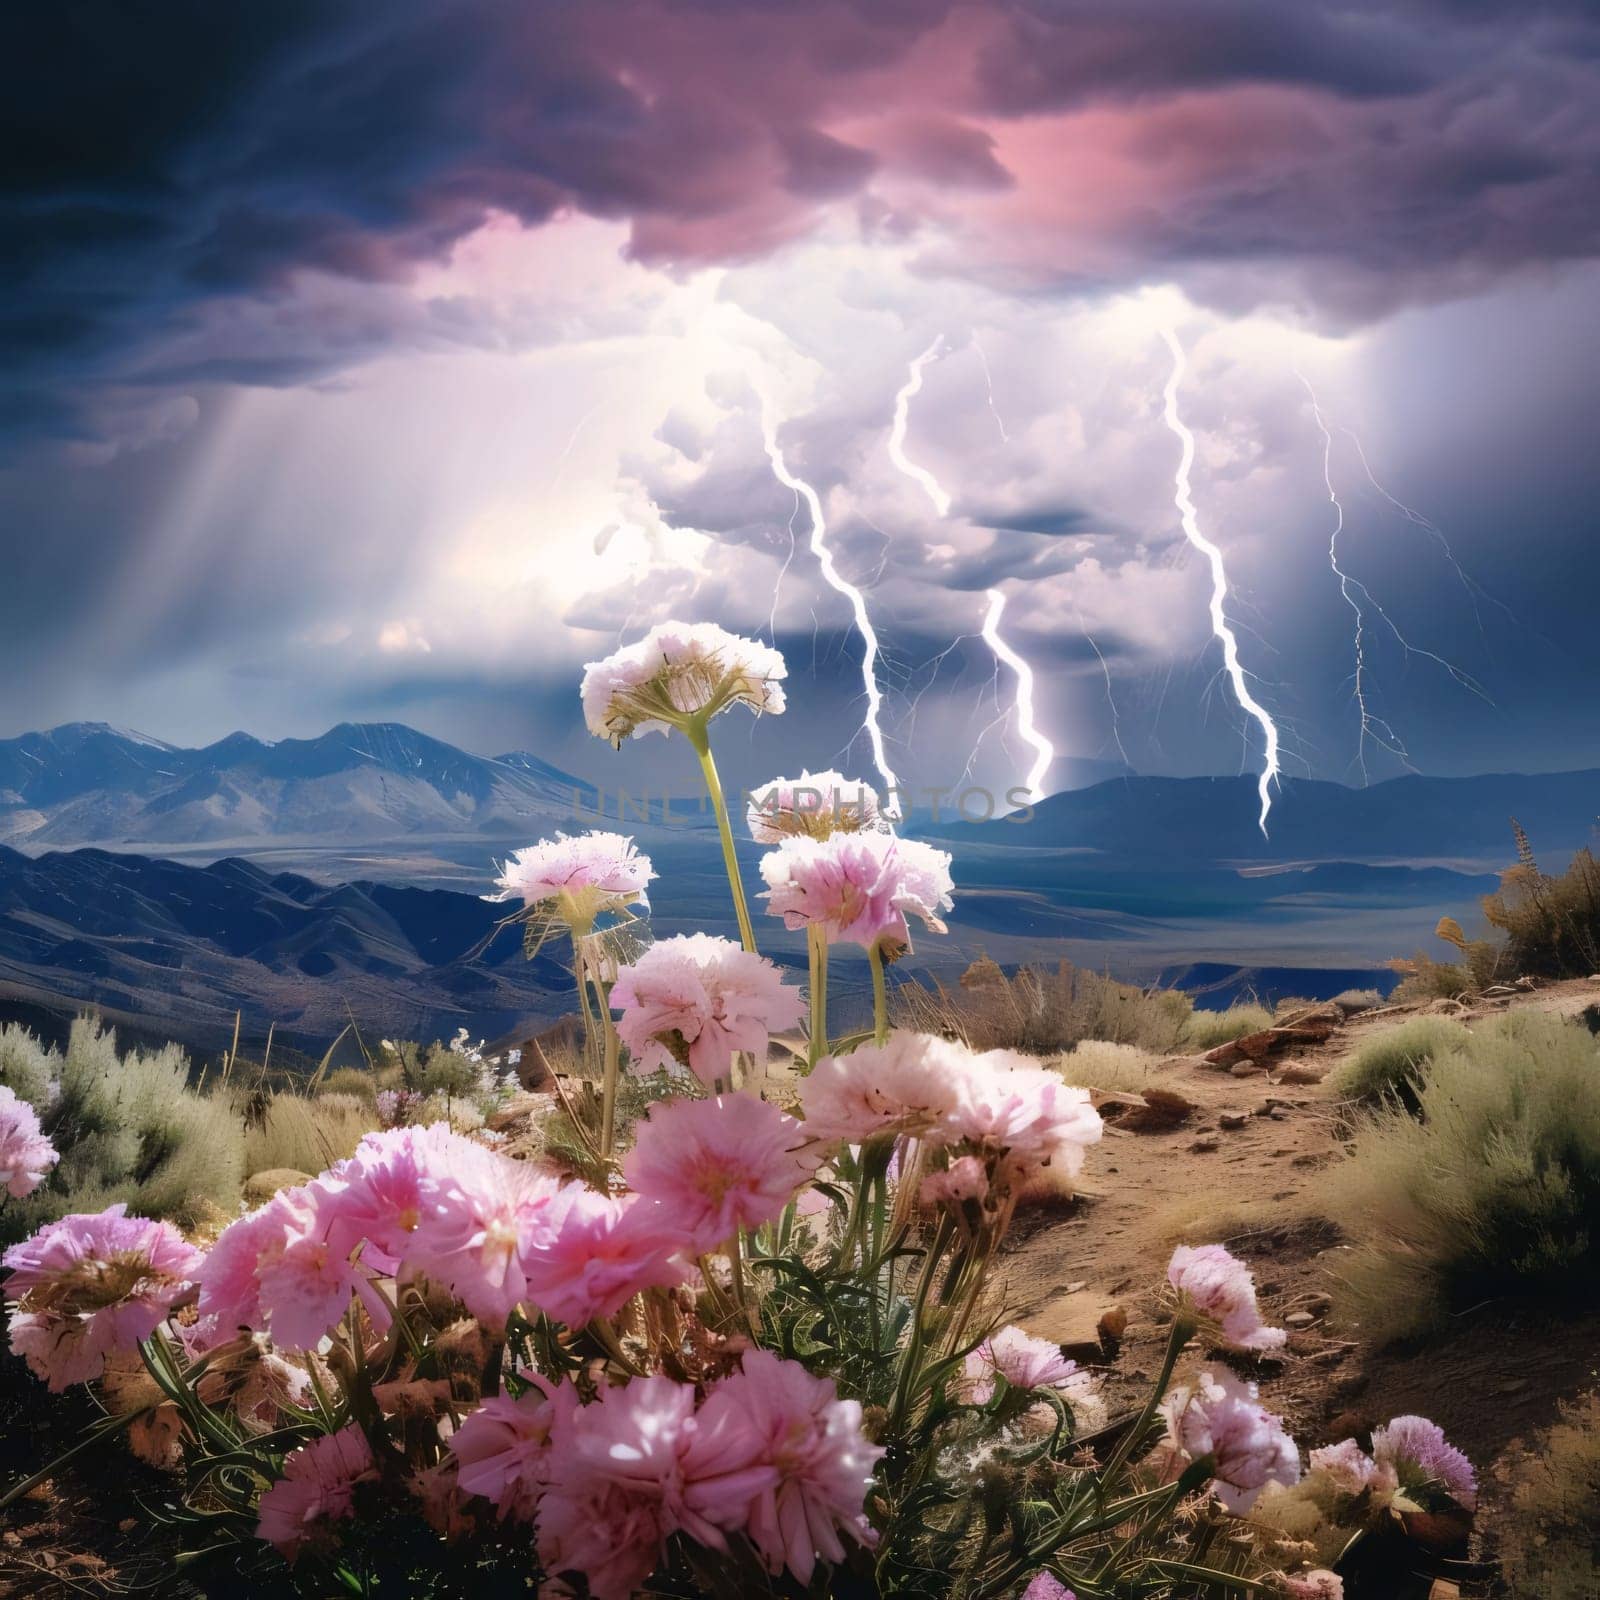 Growing pink flowers on dry mountain sands, high mountains in the distance and lightning clouded skies storm. Flowering flowers, a symbol of spring, new life. A joyful time of nature waking up to life.